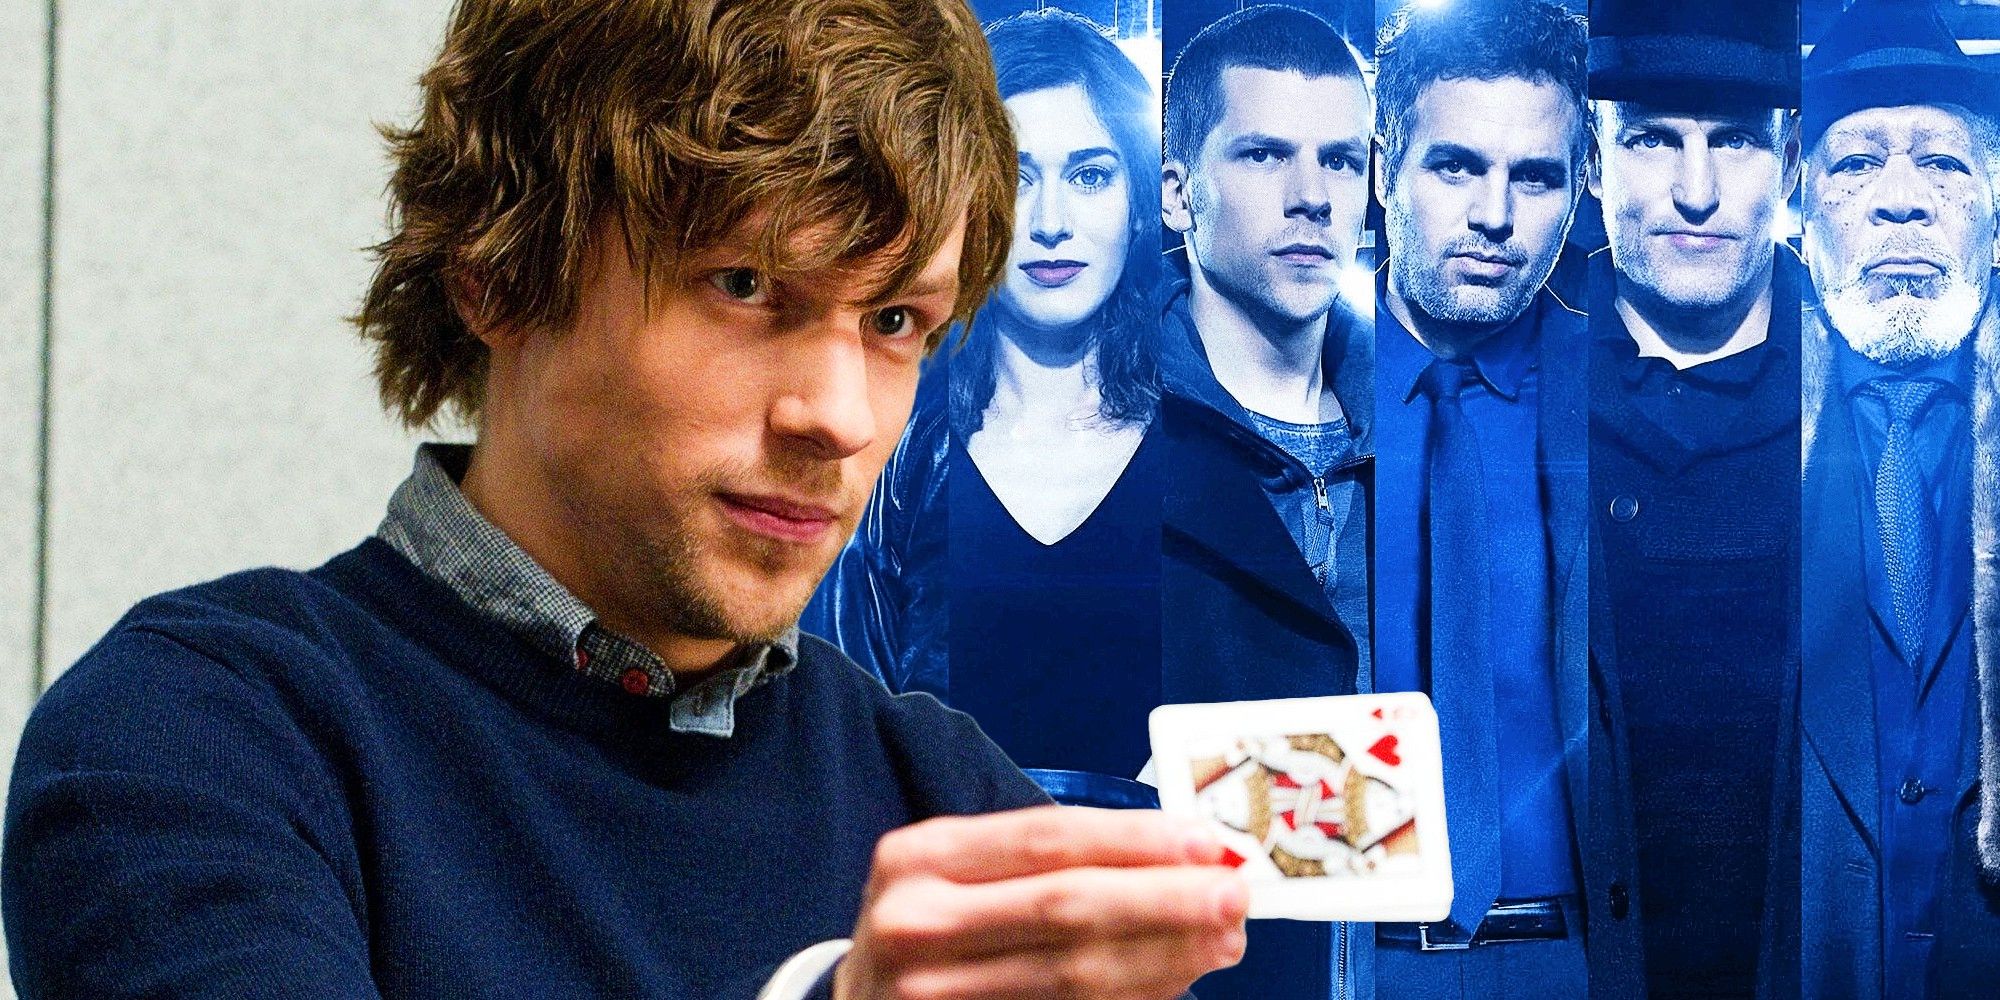 Now You See Me 3’s Biggest Missing Cast Member Is Incredibly Frustrating